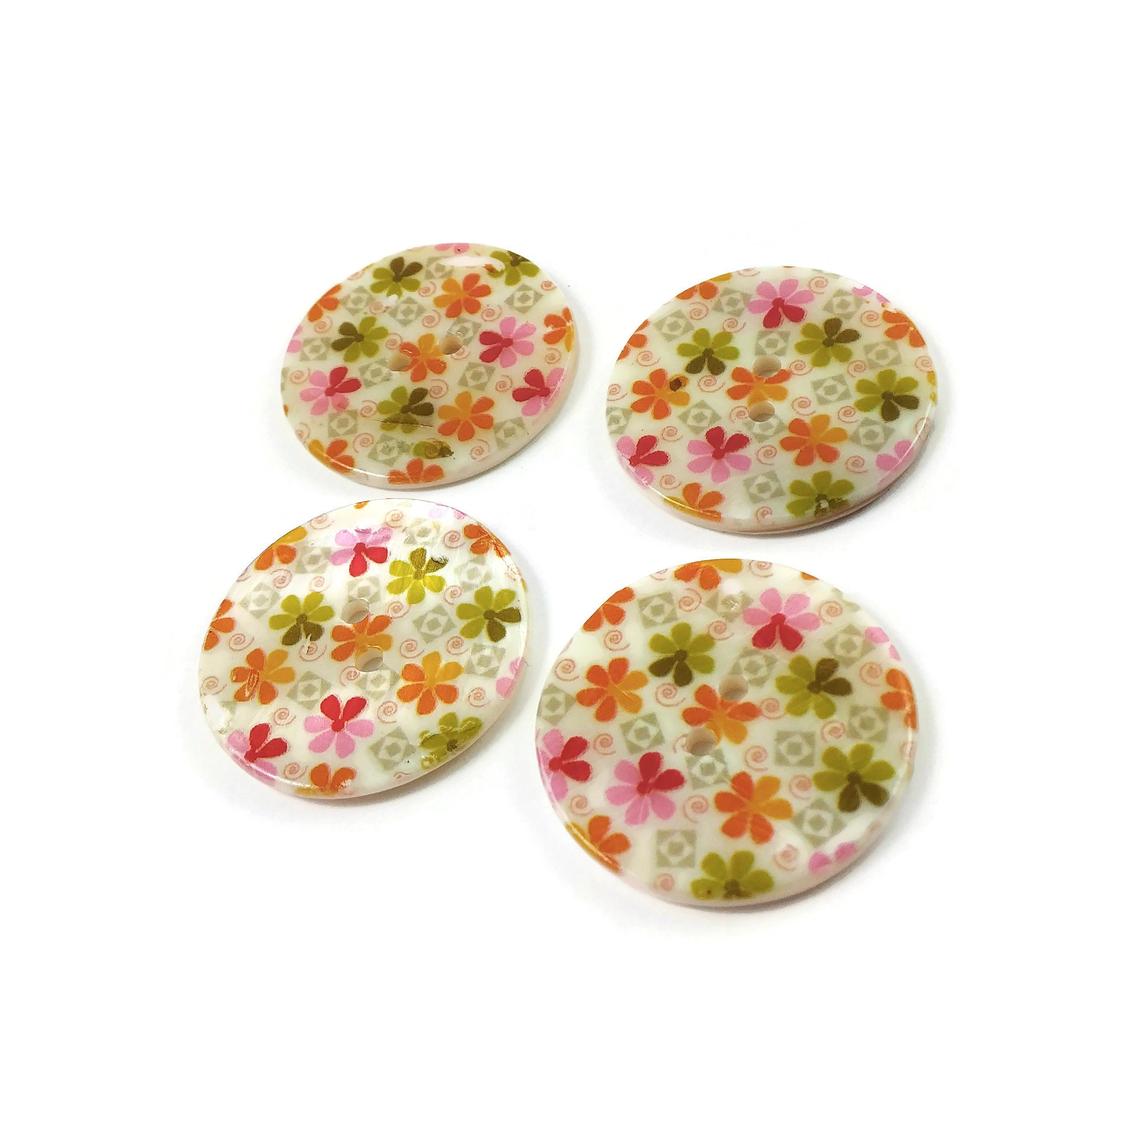 Summer flower buttons - Mother of Pearl Shell Buttons 30mm - set of 4 eco friendly natural buttons